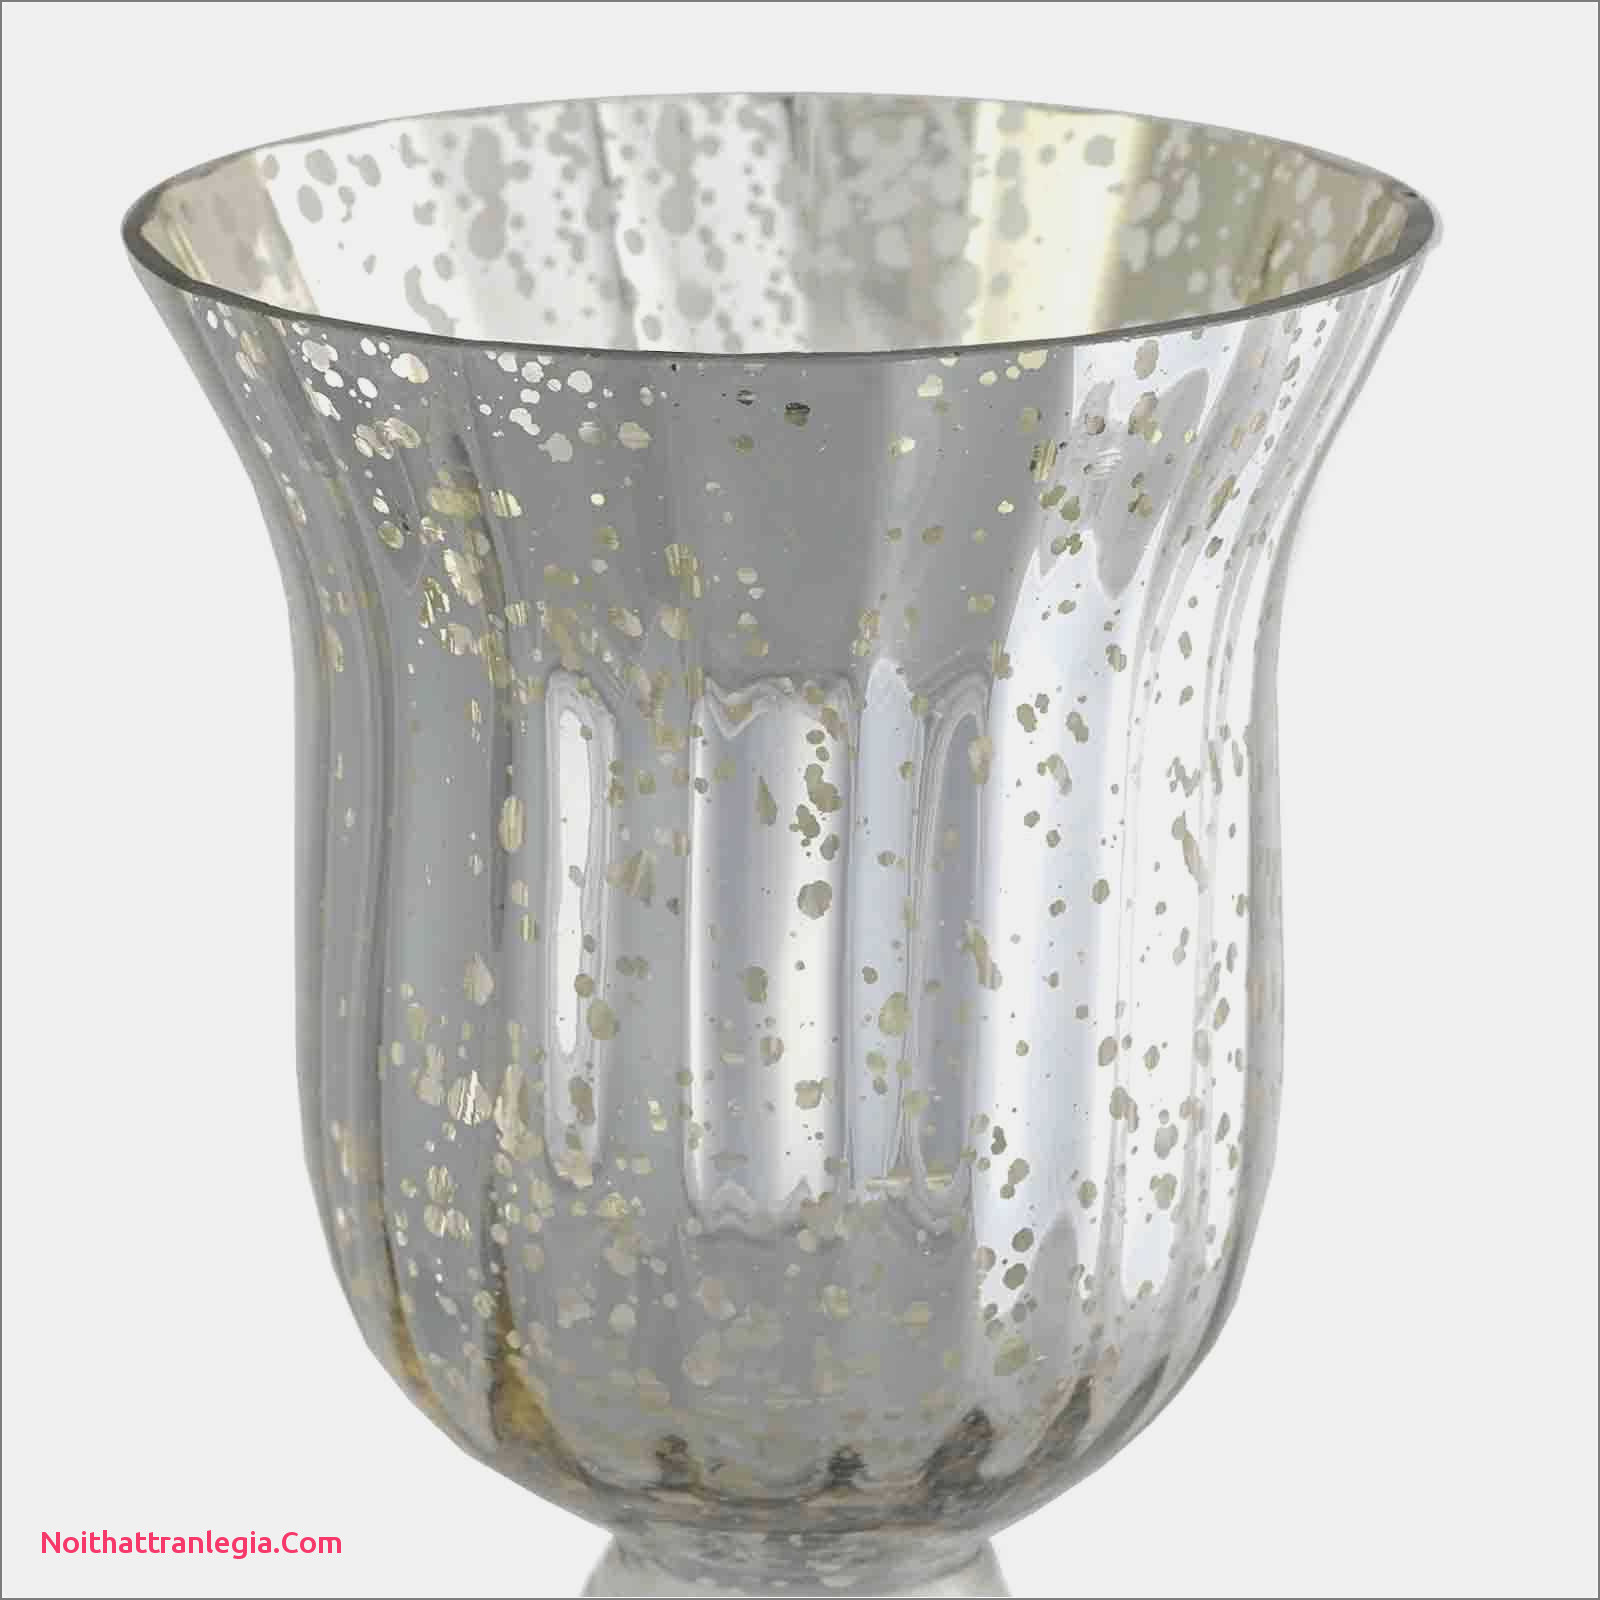 19 Fantastic Small Crystal Vase 2022 free download small crystal vase of 20 wedding vases noithattranlegia vases design pertaining to wedding guest gift ideas inspirational candles for wedding favors superb pe s5h vases candle vase i